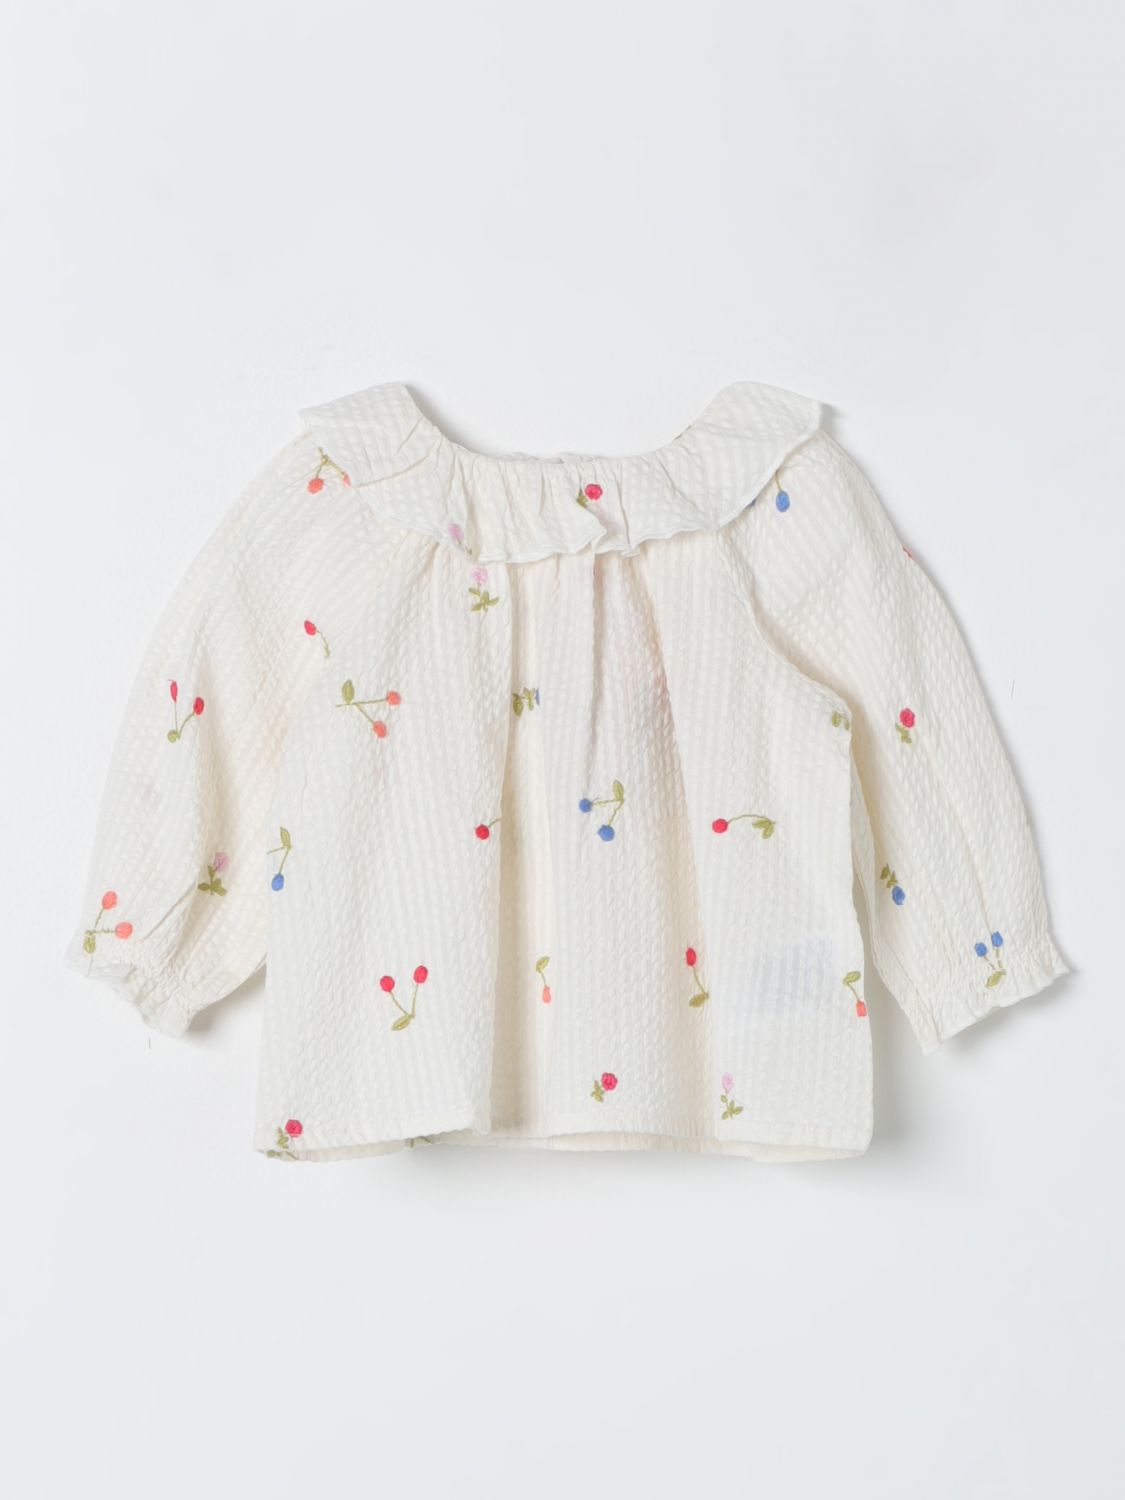 Bonpoint Babies' Sweater  Kids Color White